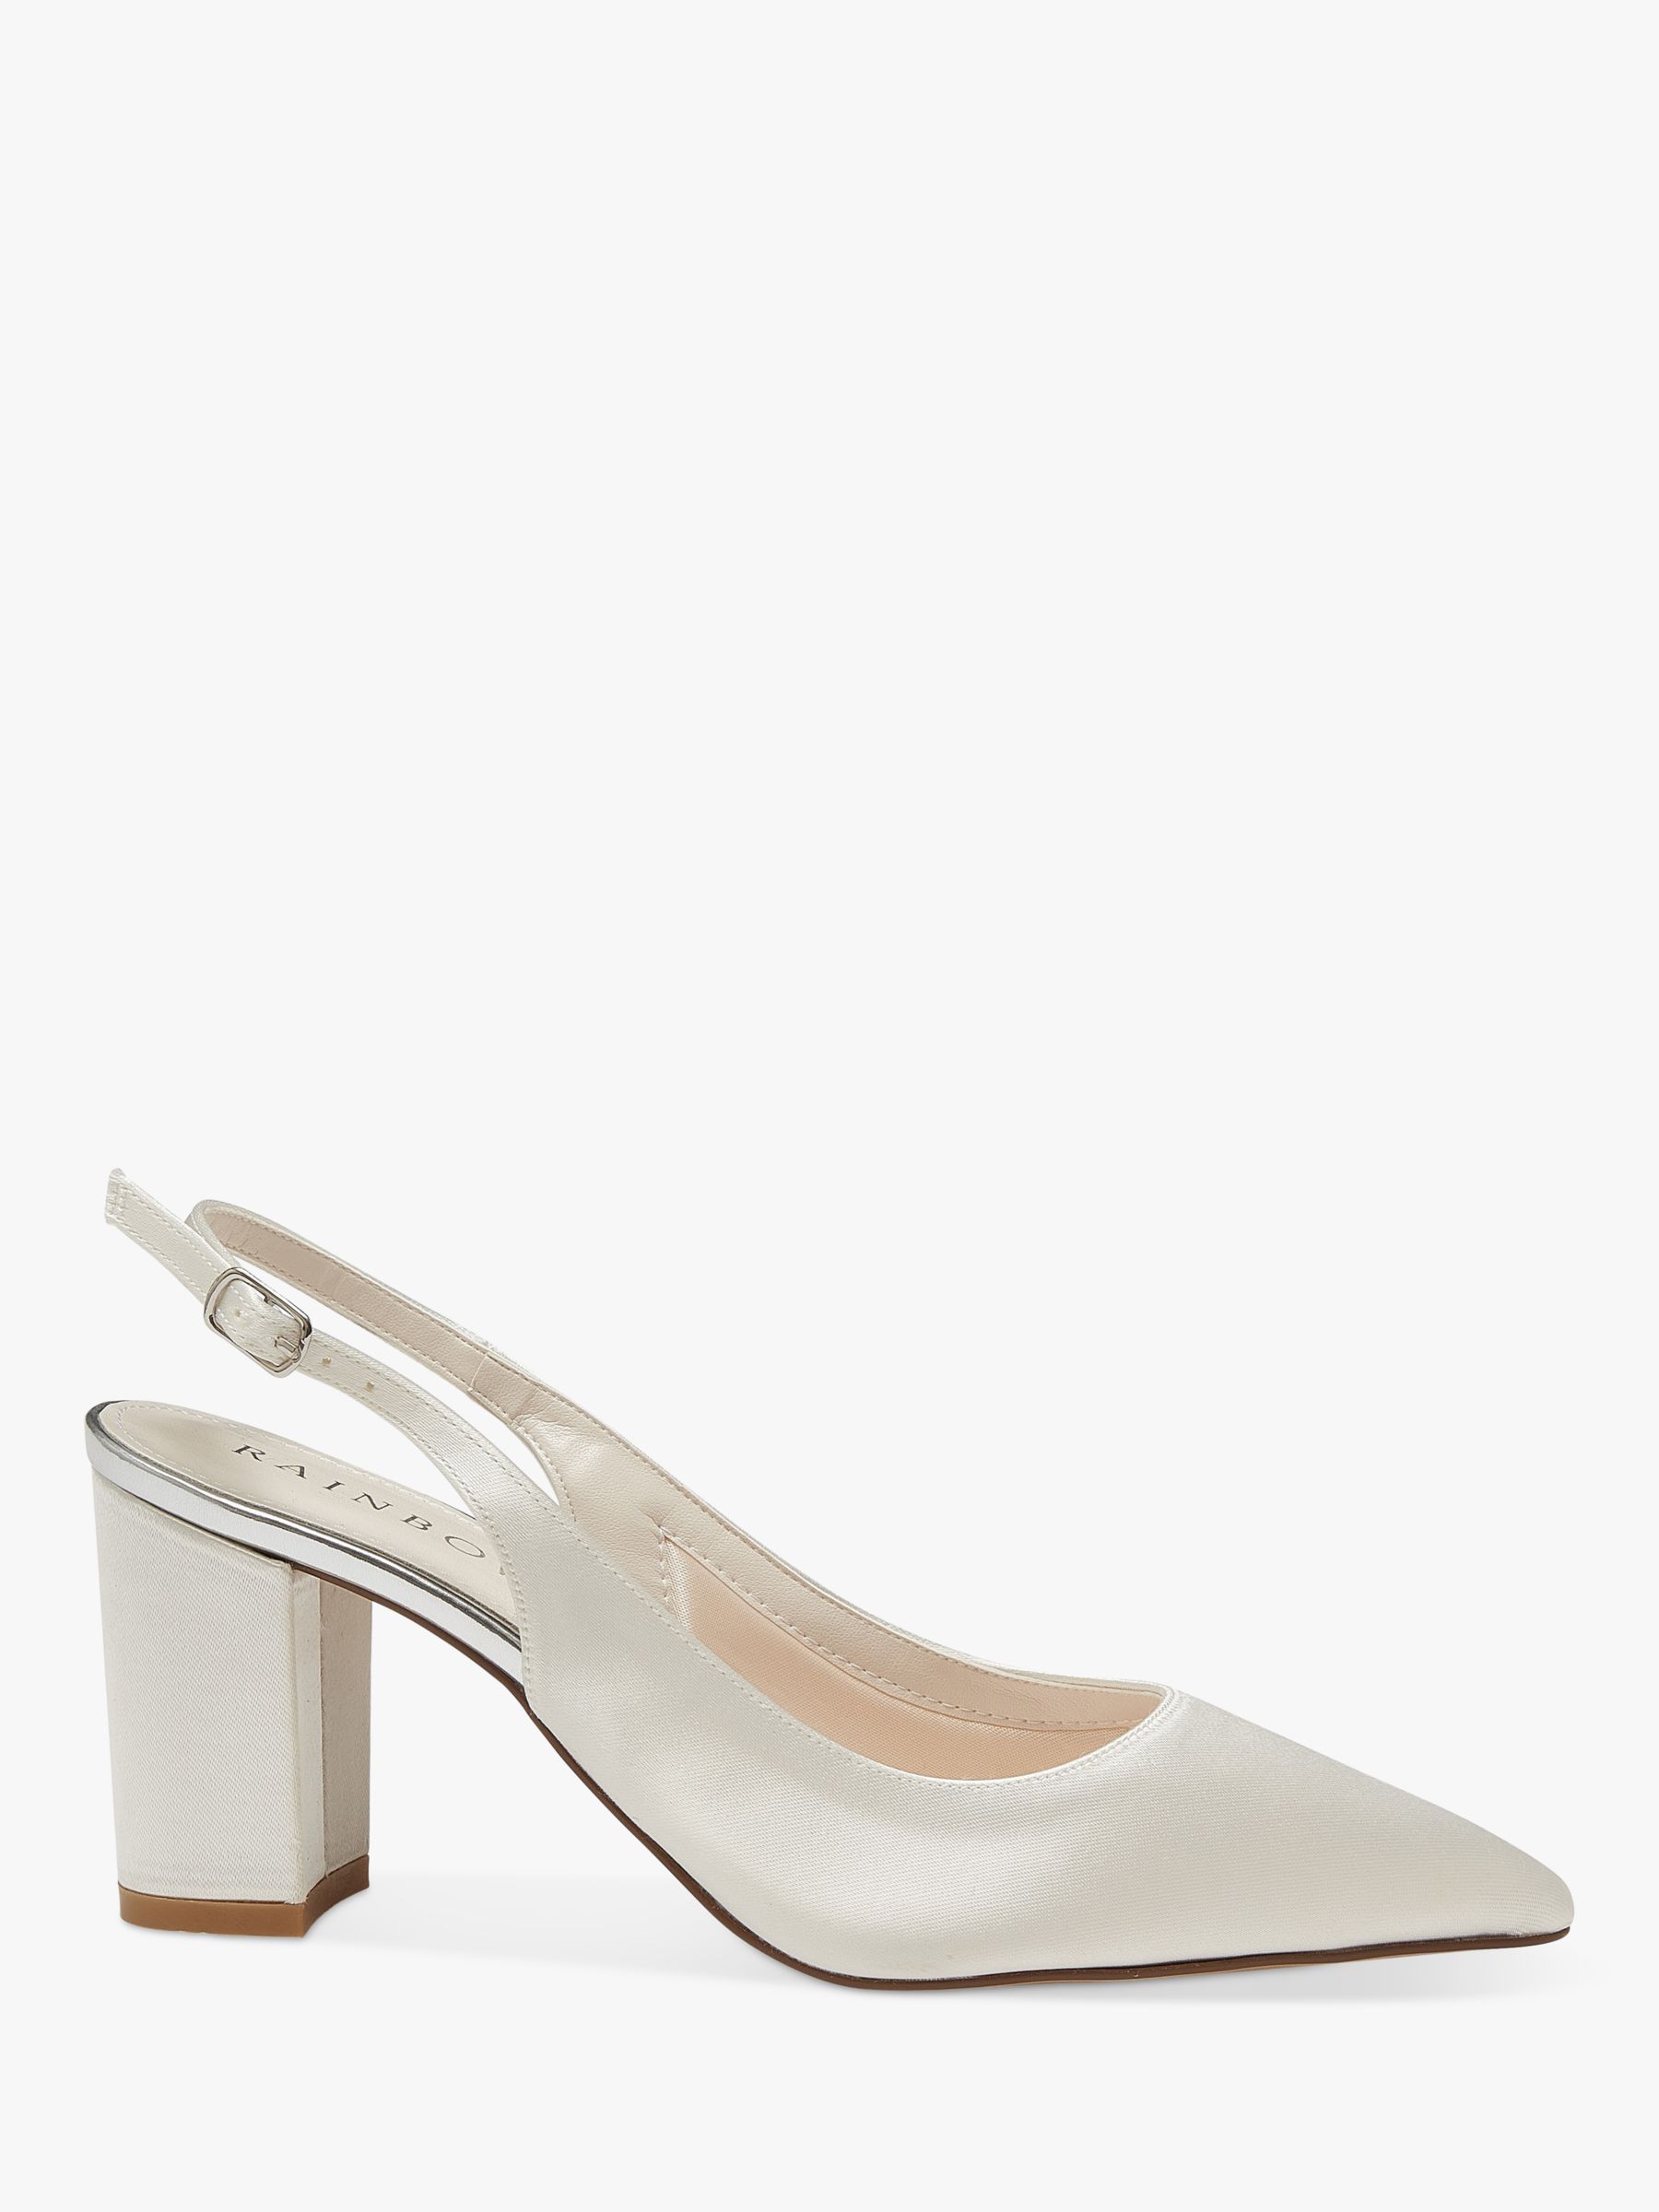 Buy Rainbow Club Faith+Fit Wide Court Shoes, Ivory Satin Online at johnlewis.com